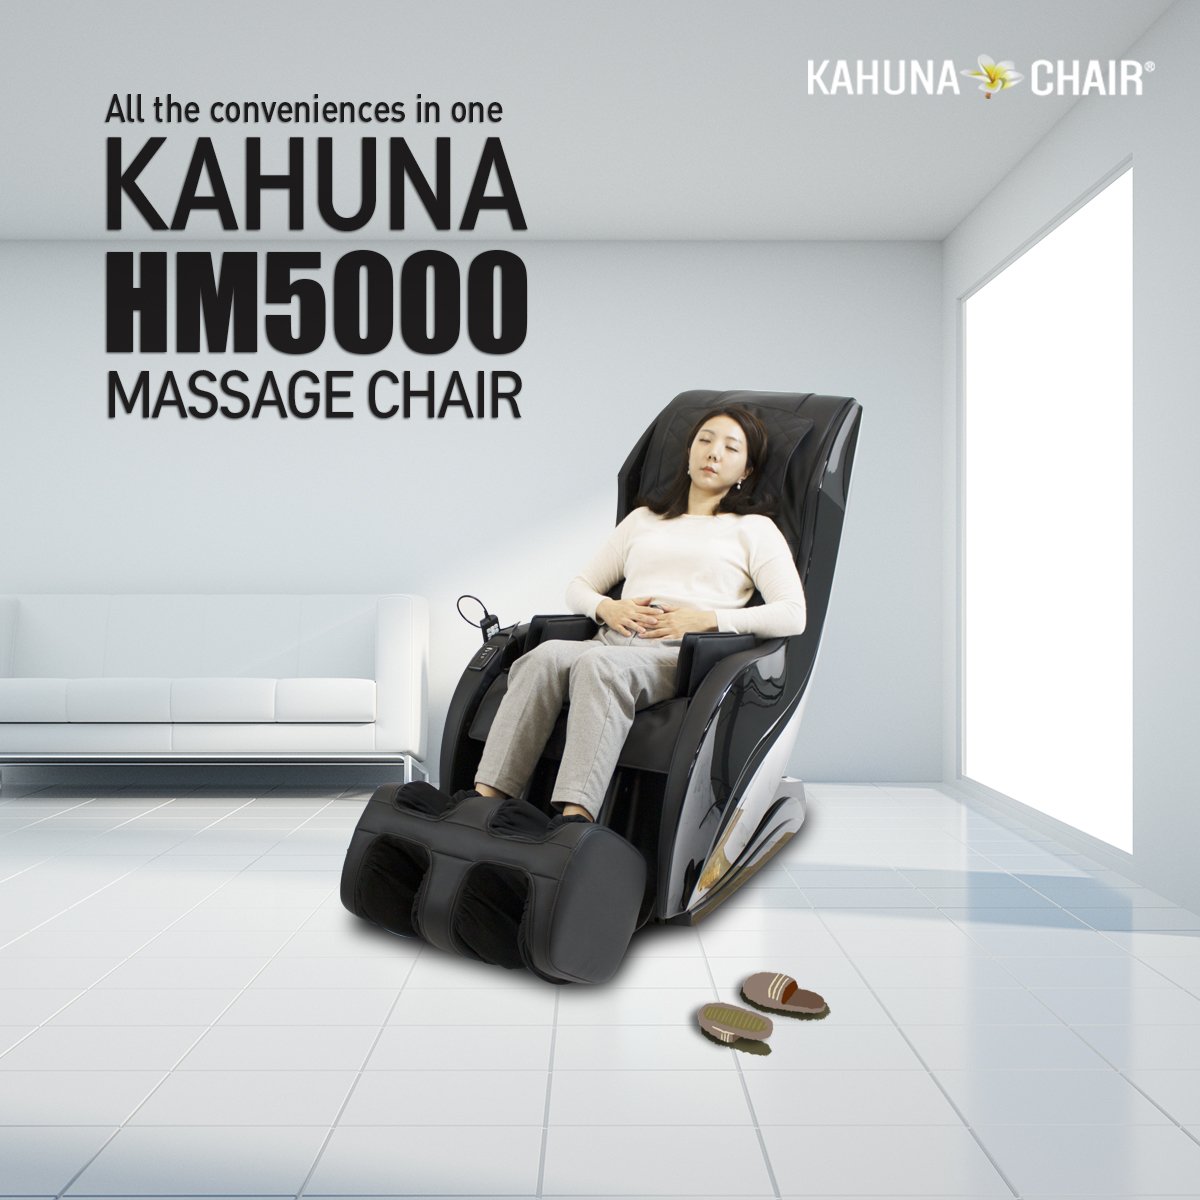 Kahuna Limitless Slender All Conveniences in One Massage Chair